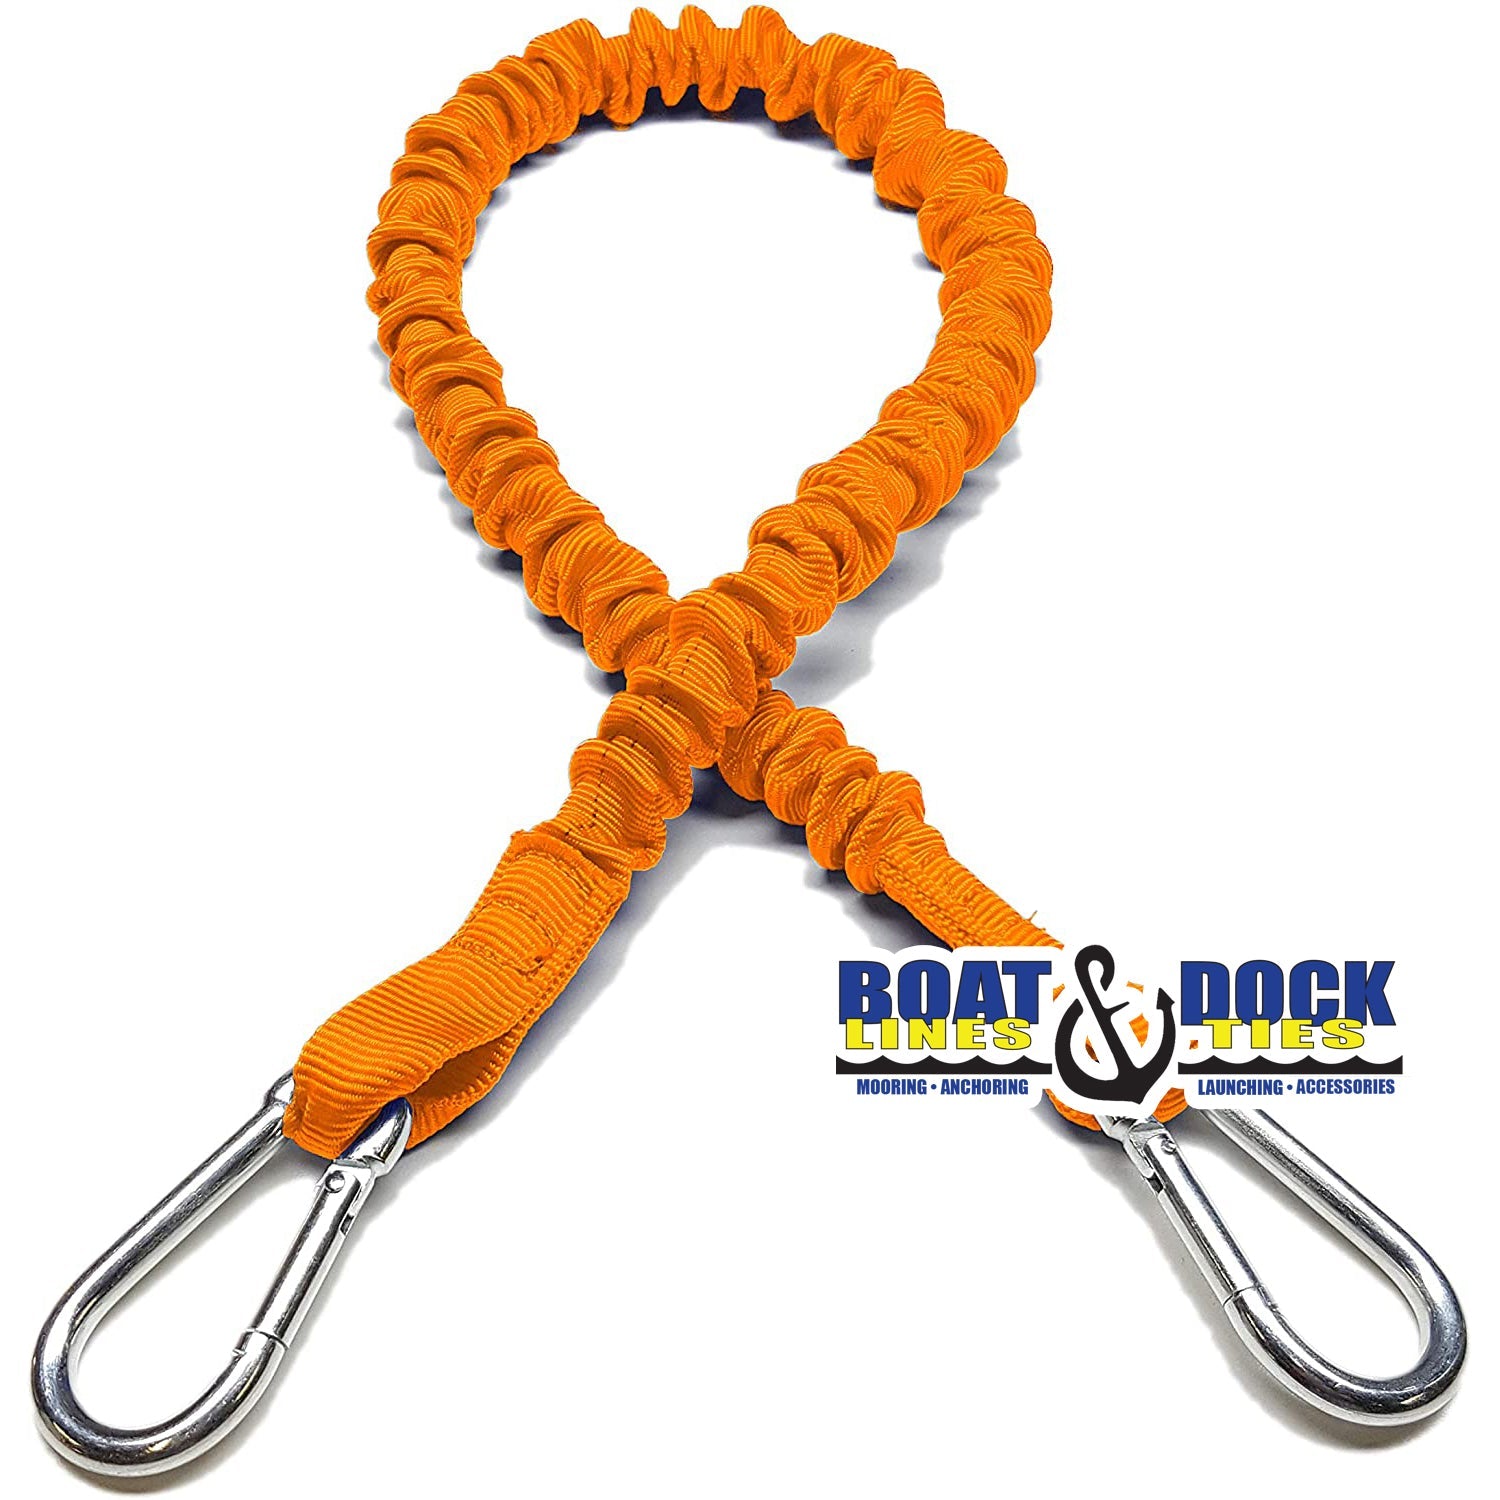 Boat Lines & Dock Ties - Boat Dock Tie Bungee Cords, 24 Hooked Ends, UV  Protected Bungee Cords - Set of 2 - Made in USA (Black)